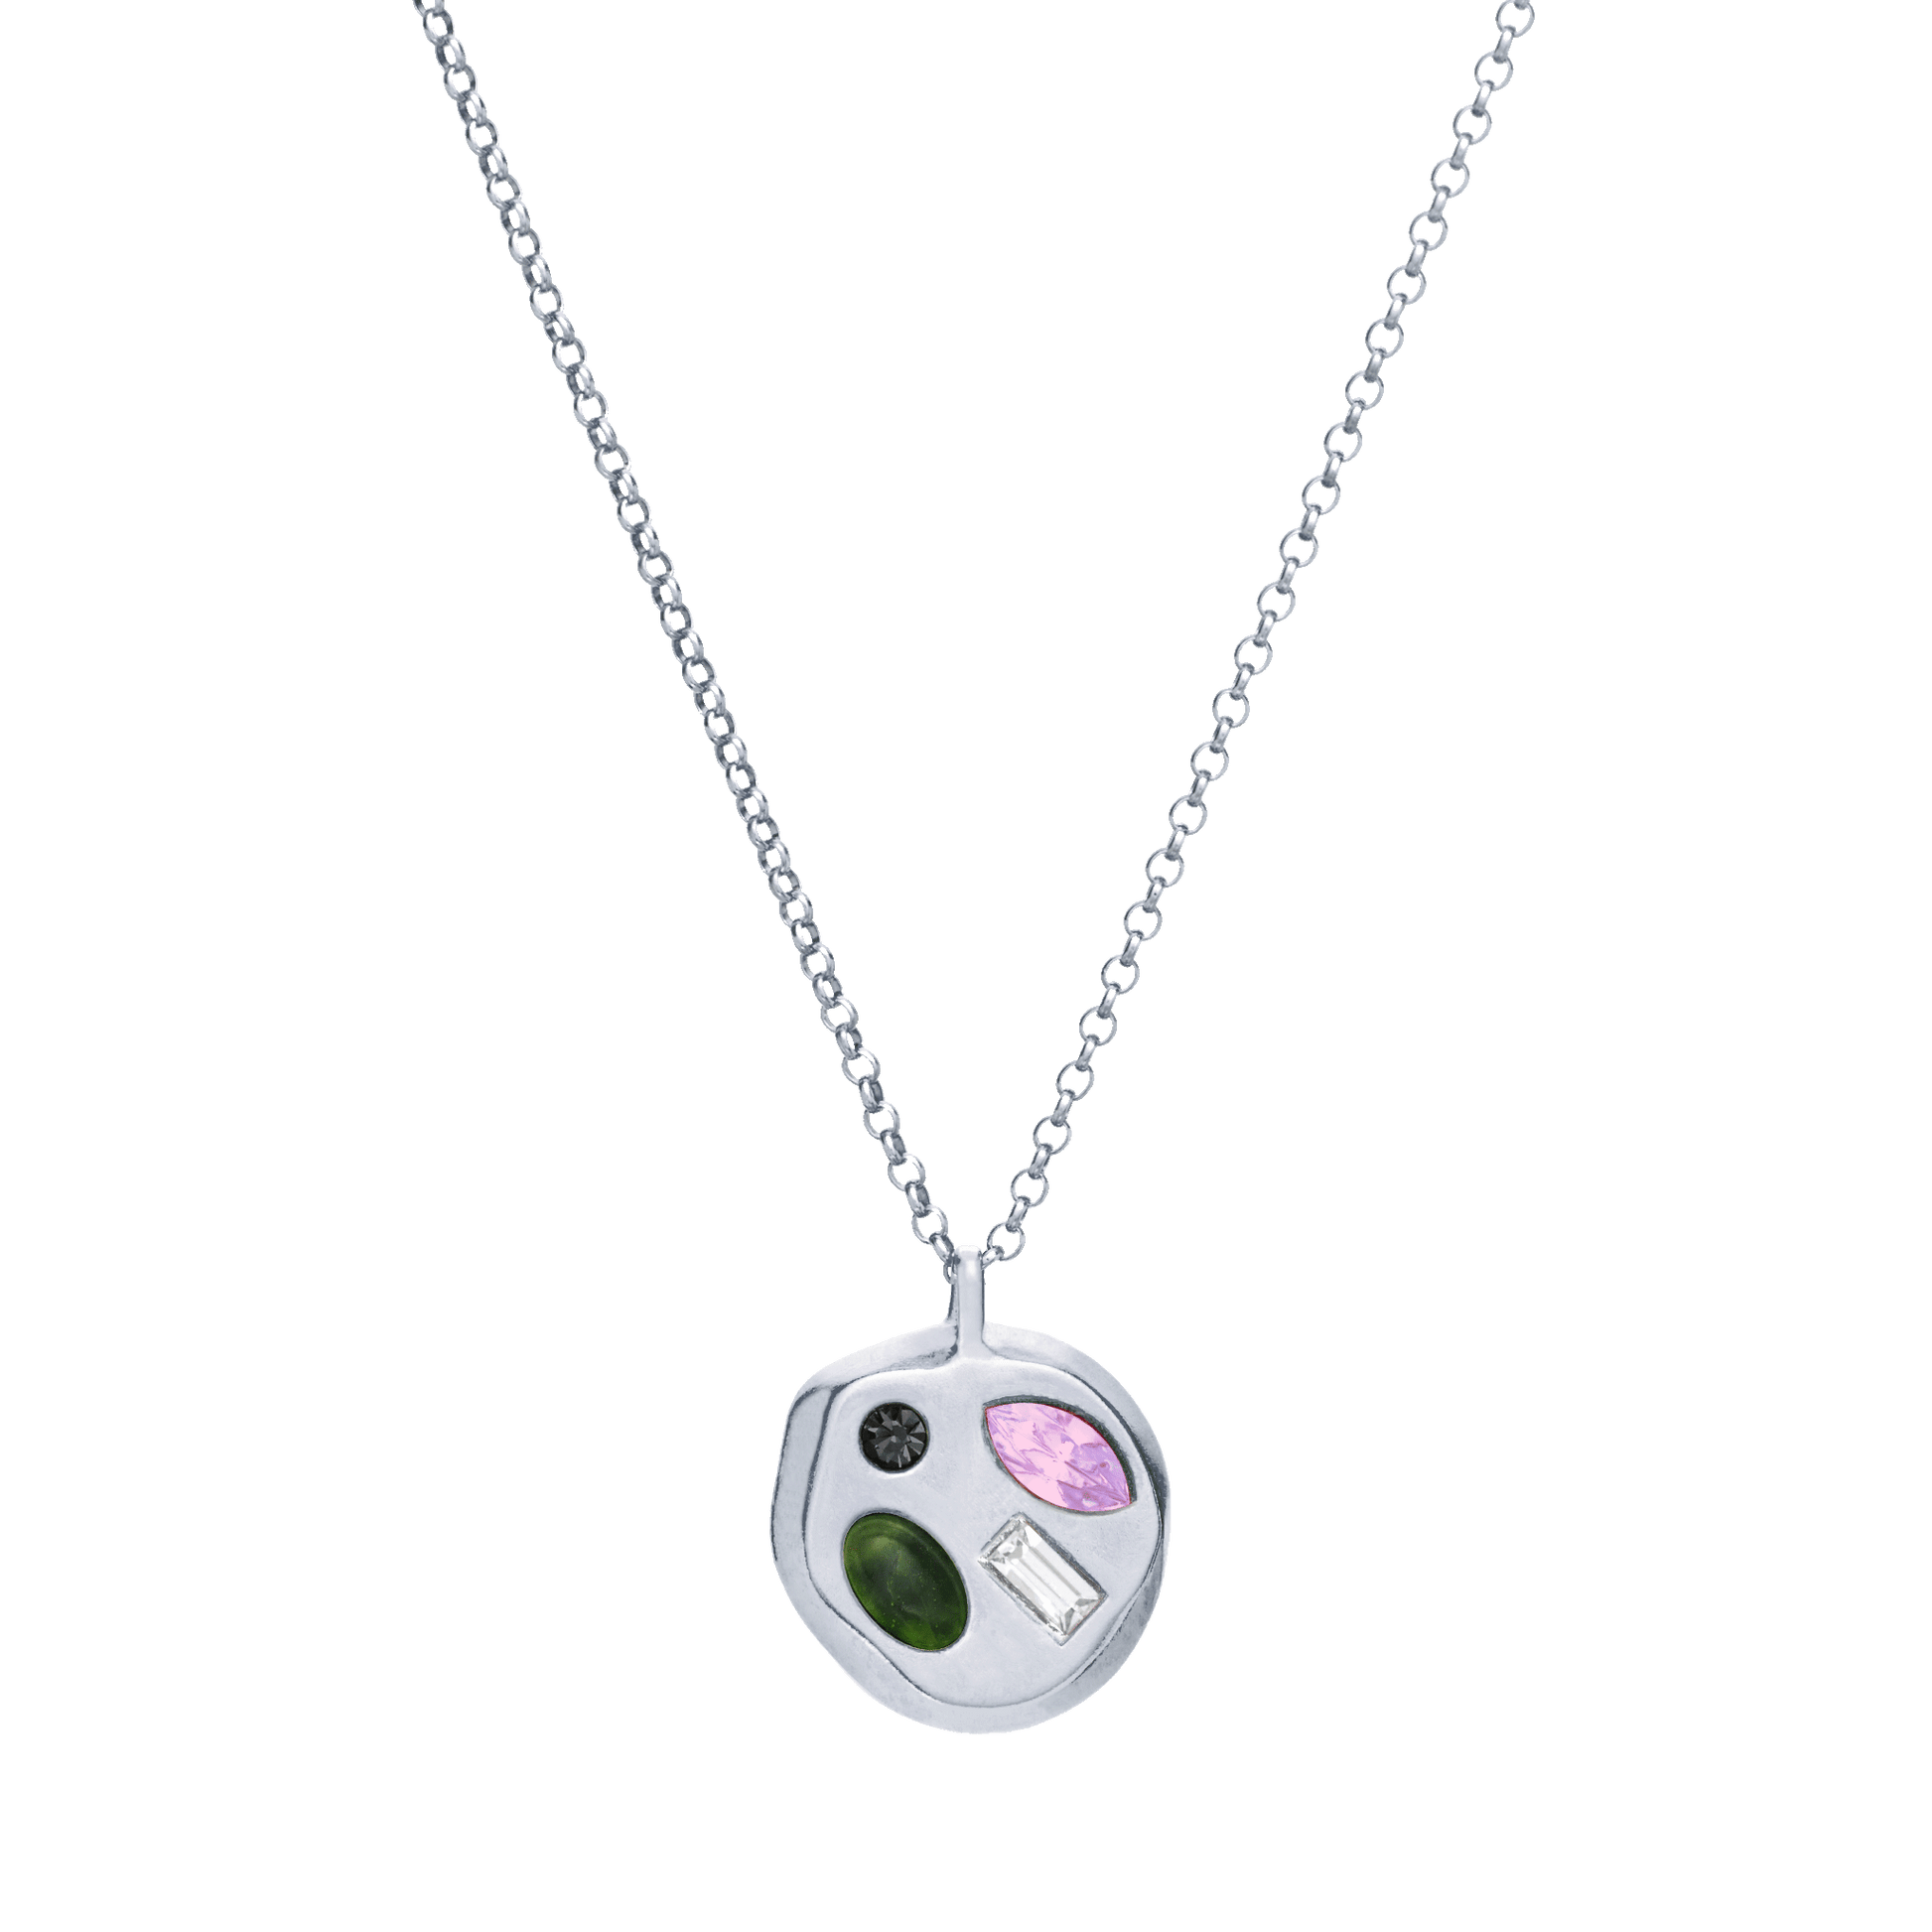 The June Thirteenth Pendant in Sterling Silver